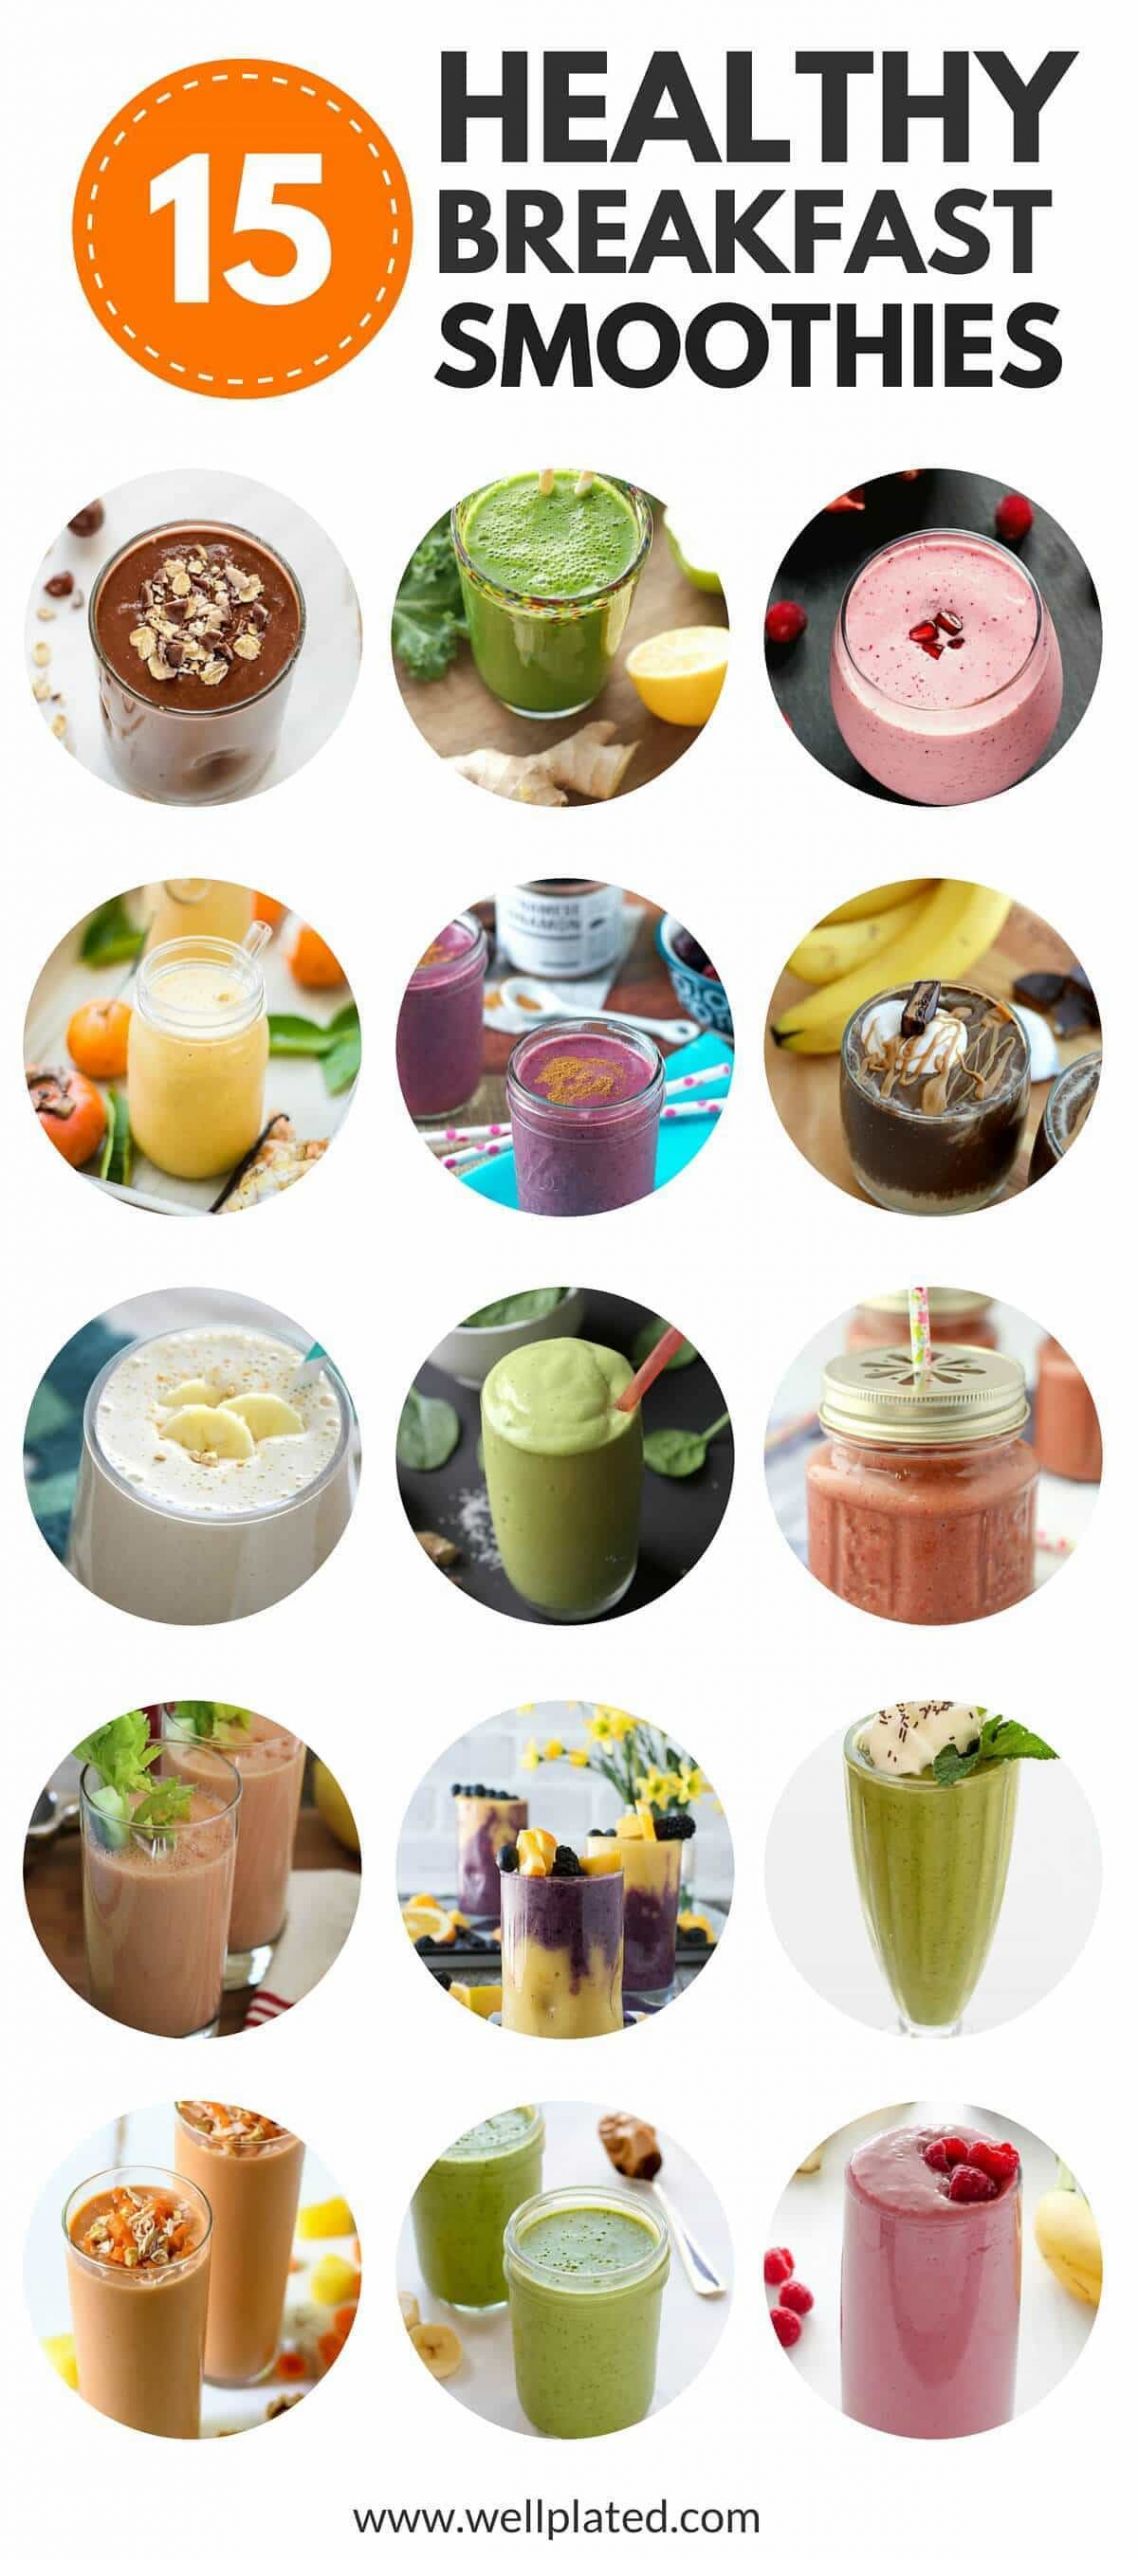 Best Breakfast Smoothies For Weight Loss
 The Best 15 Healthy Breakfast Smoothies